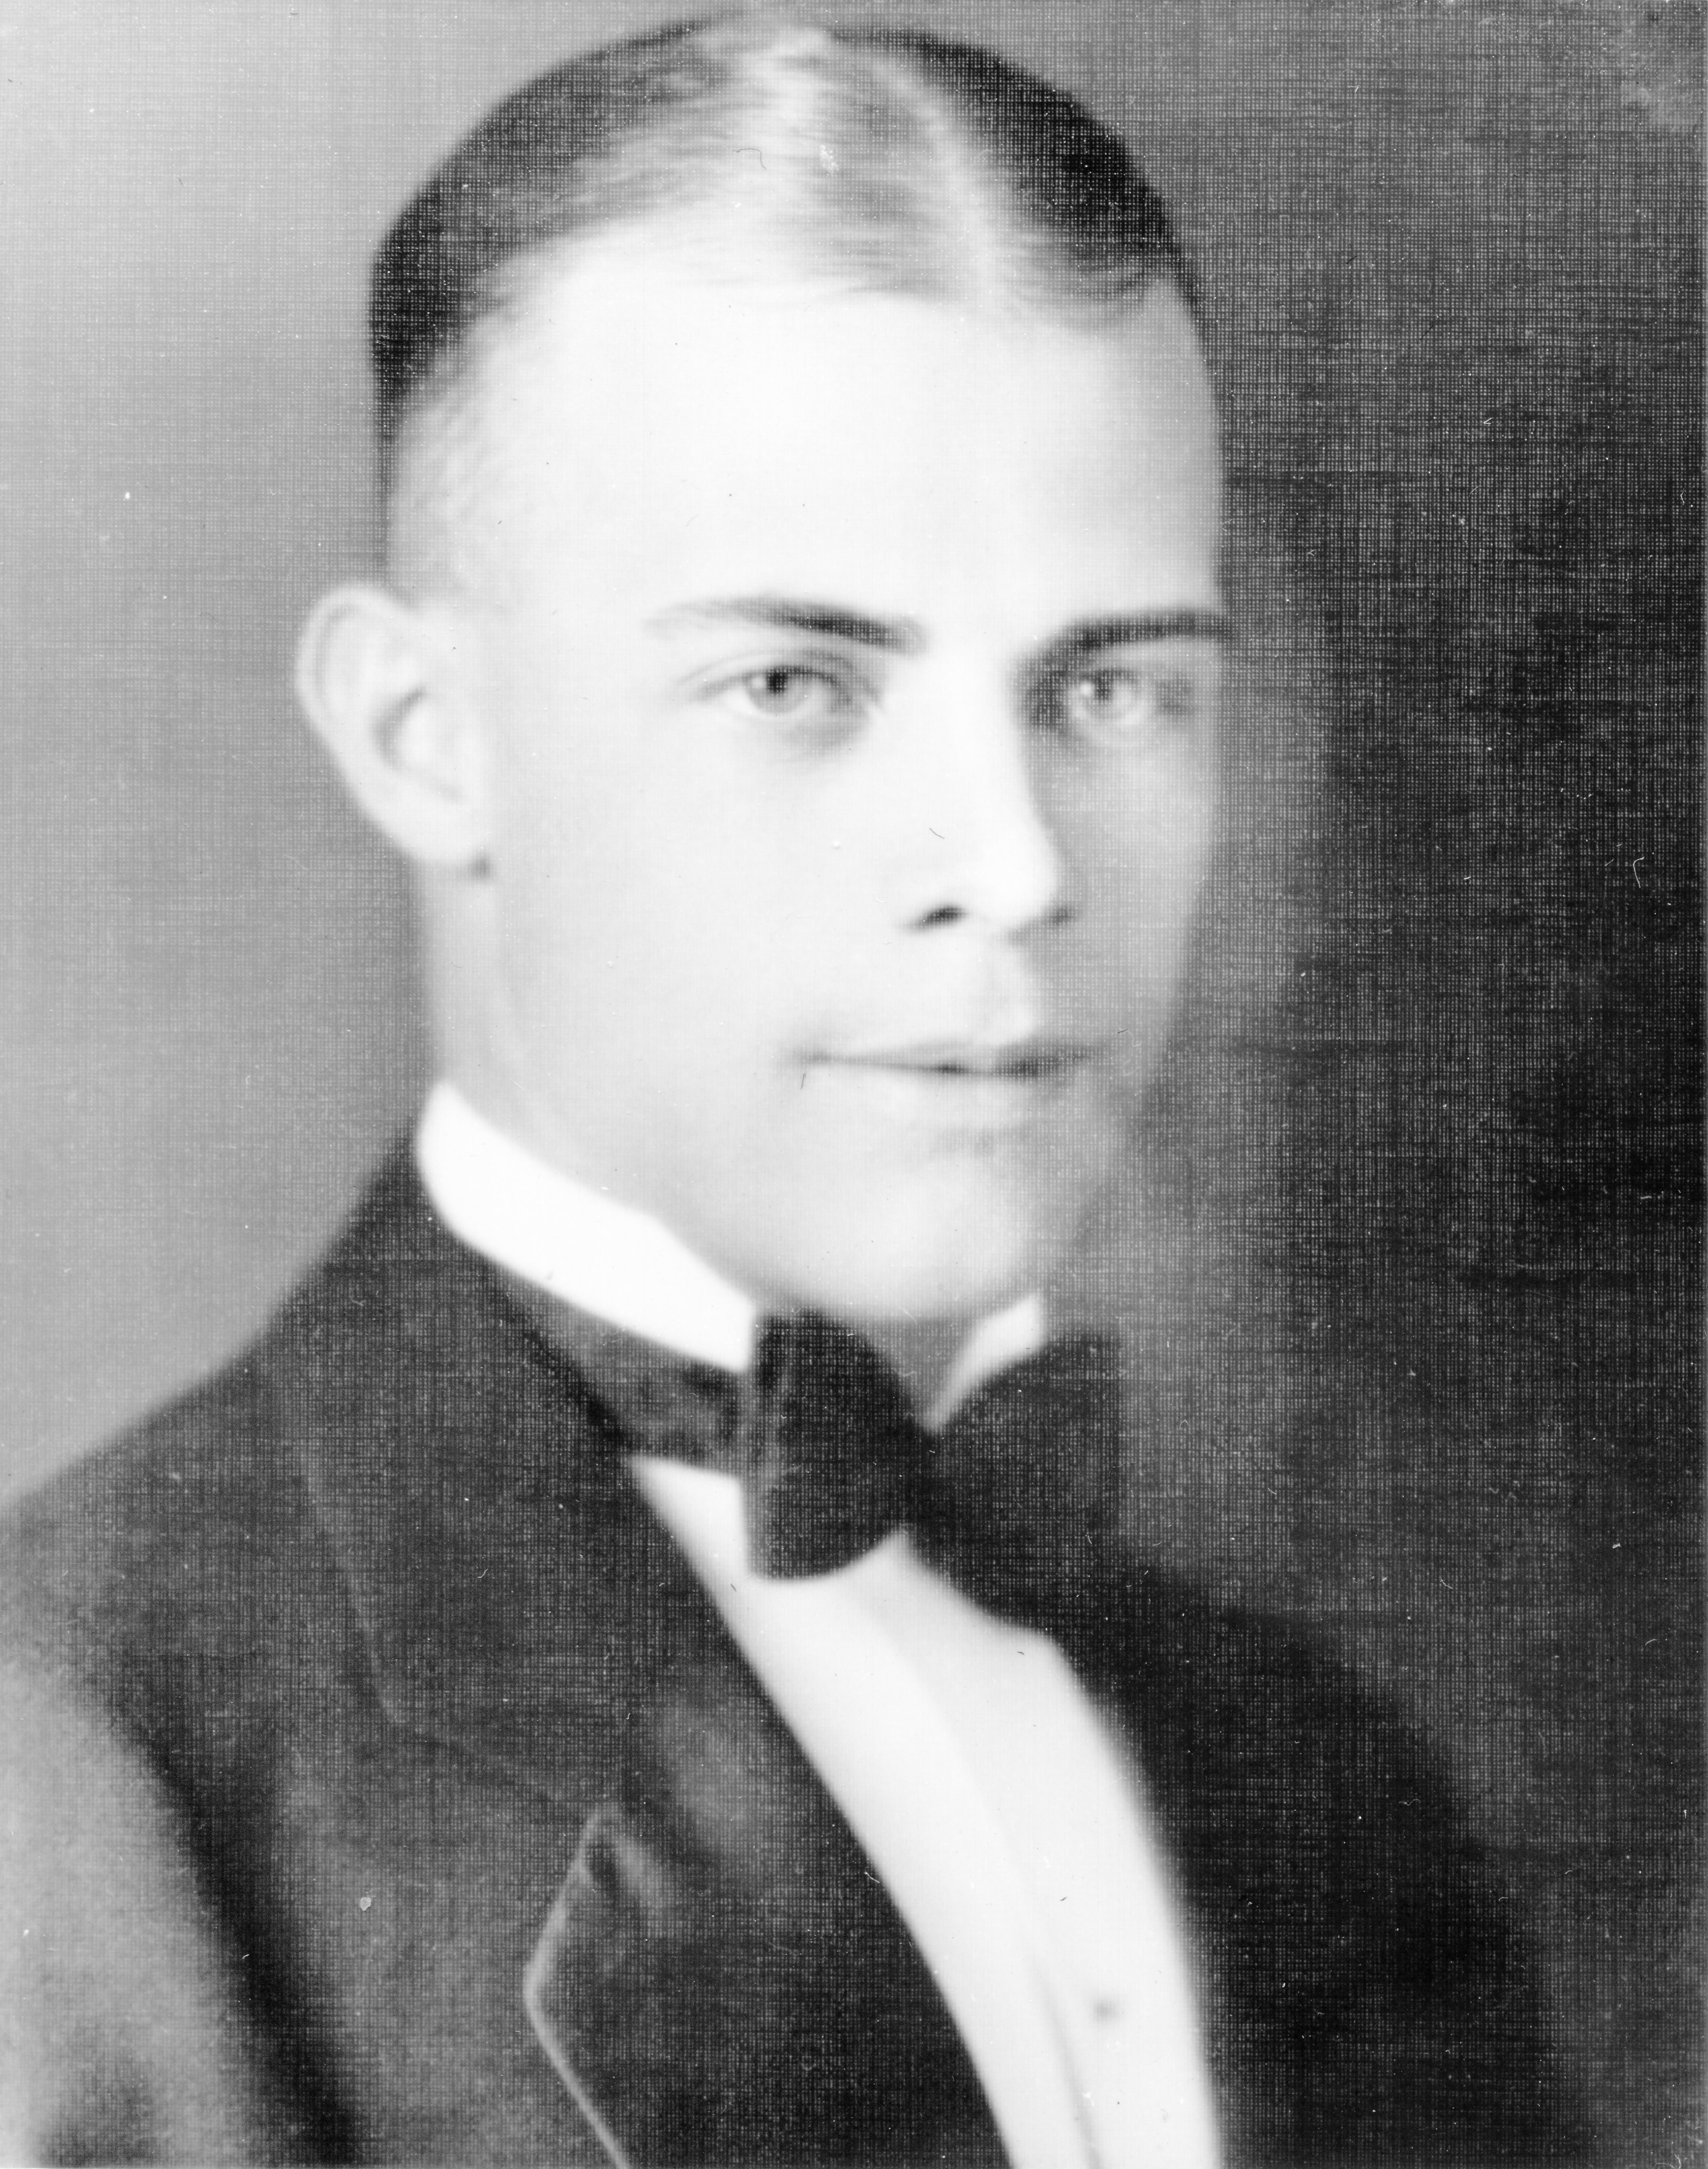 Arthur Kerlee portrait from yearbook. He has light eyes and a bow tie. 